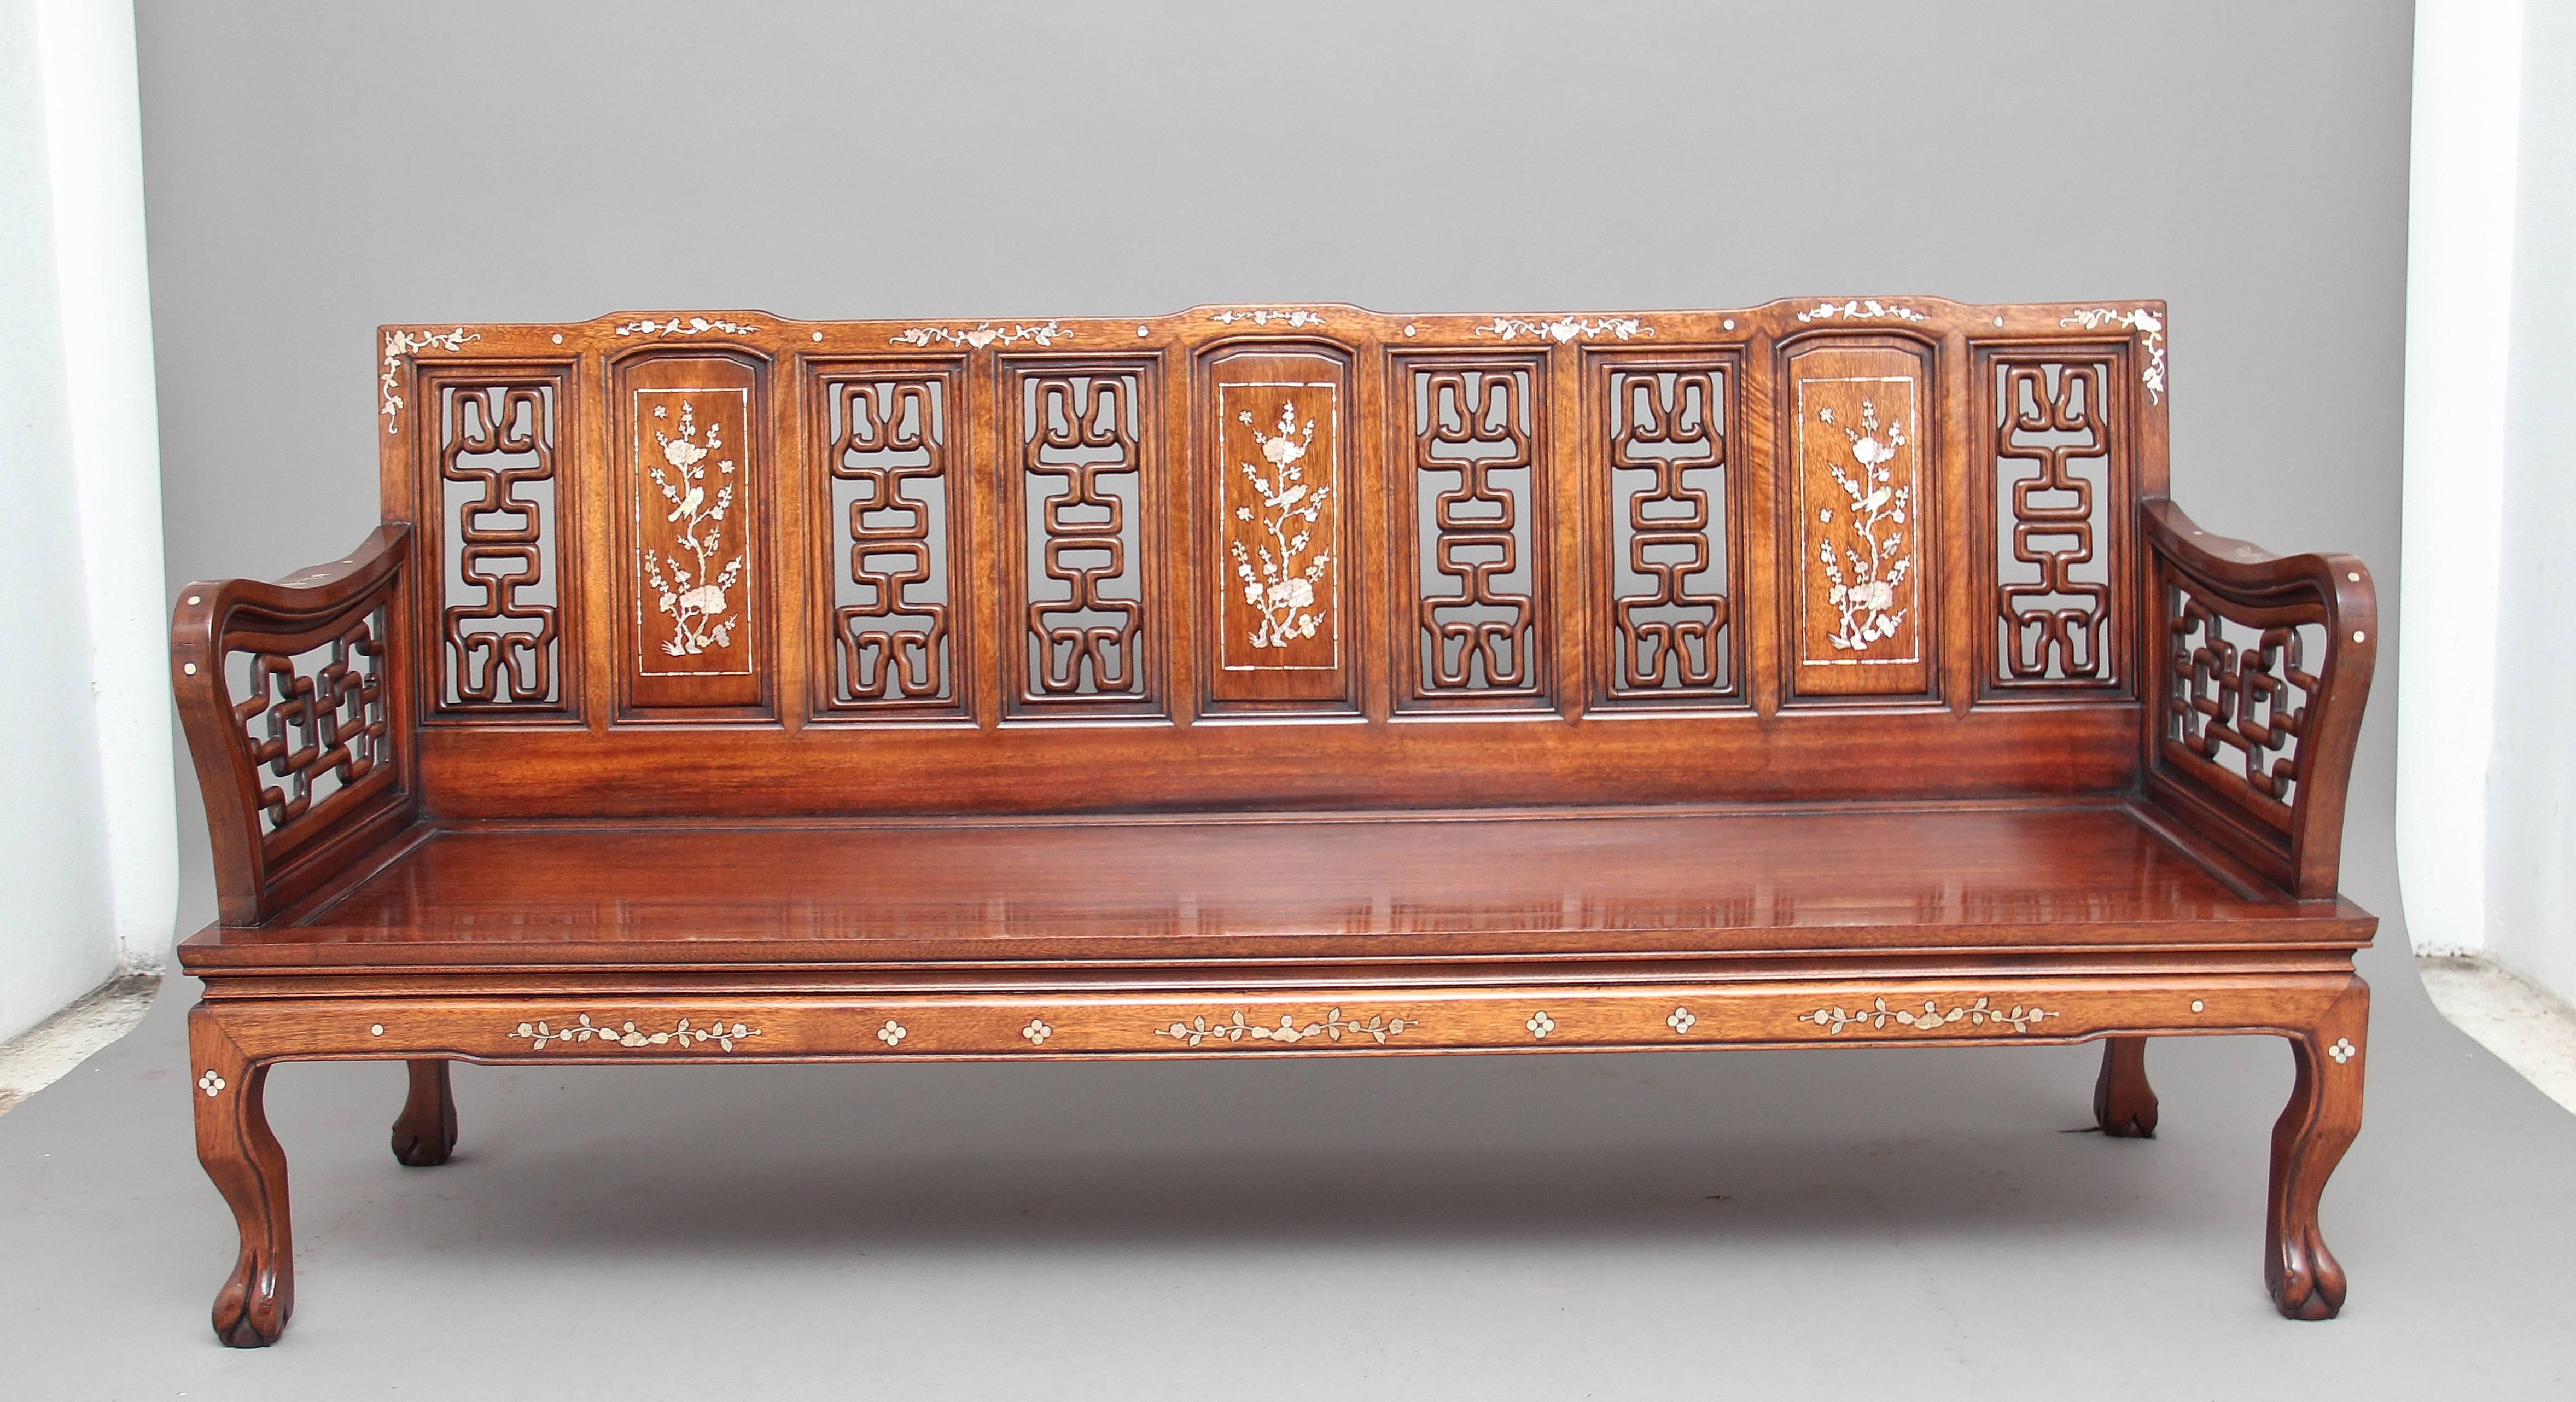 Early 20th century Chinese five-piece suite in mahogany inlaid with mother of pearl, comprising of four armchairs and a three seater sofa, the shaped backs having a central panel inlaid with mother of pearl flanked either side with panels decorated